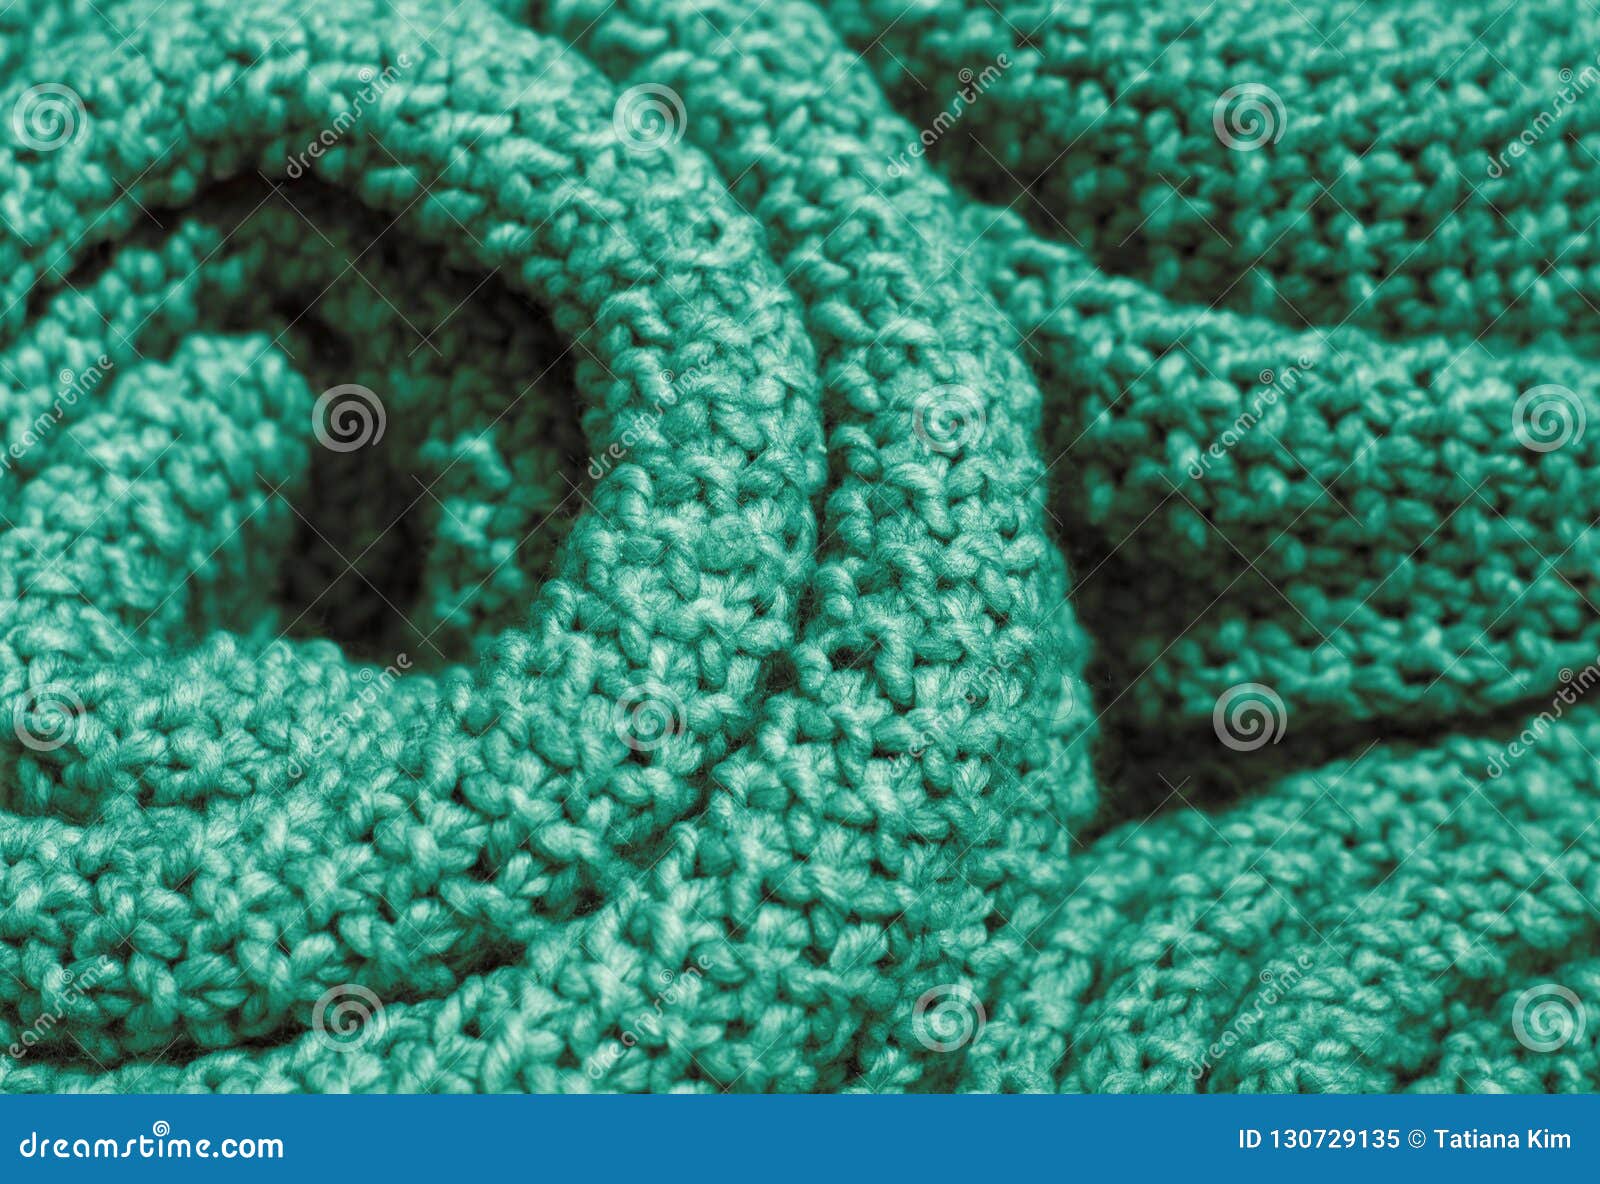 Close Up Of A Vibrant Green Wool Cloth Texture Background, Knitwear,  Sweater Texture, Wool Texture Background Image And Wallpaper for Free  Download